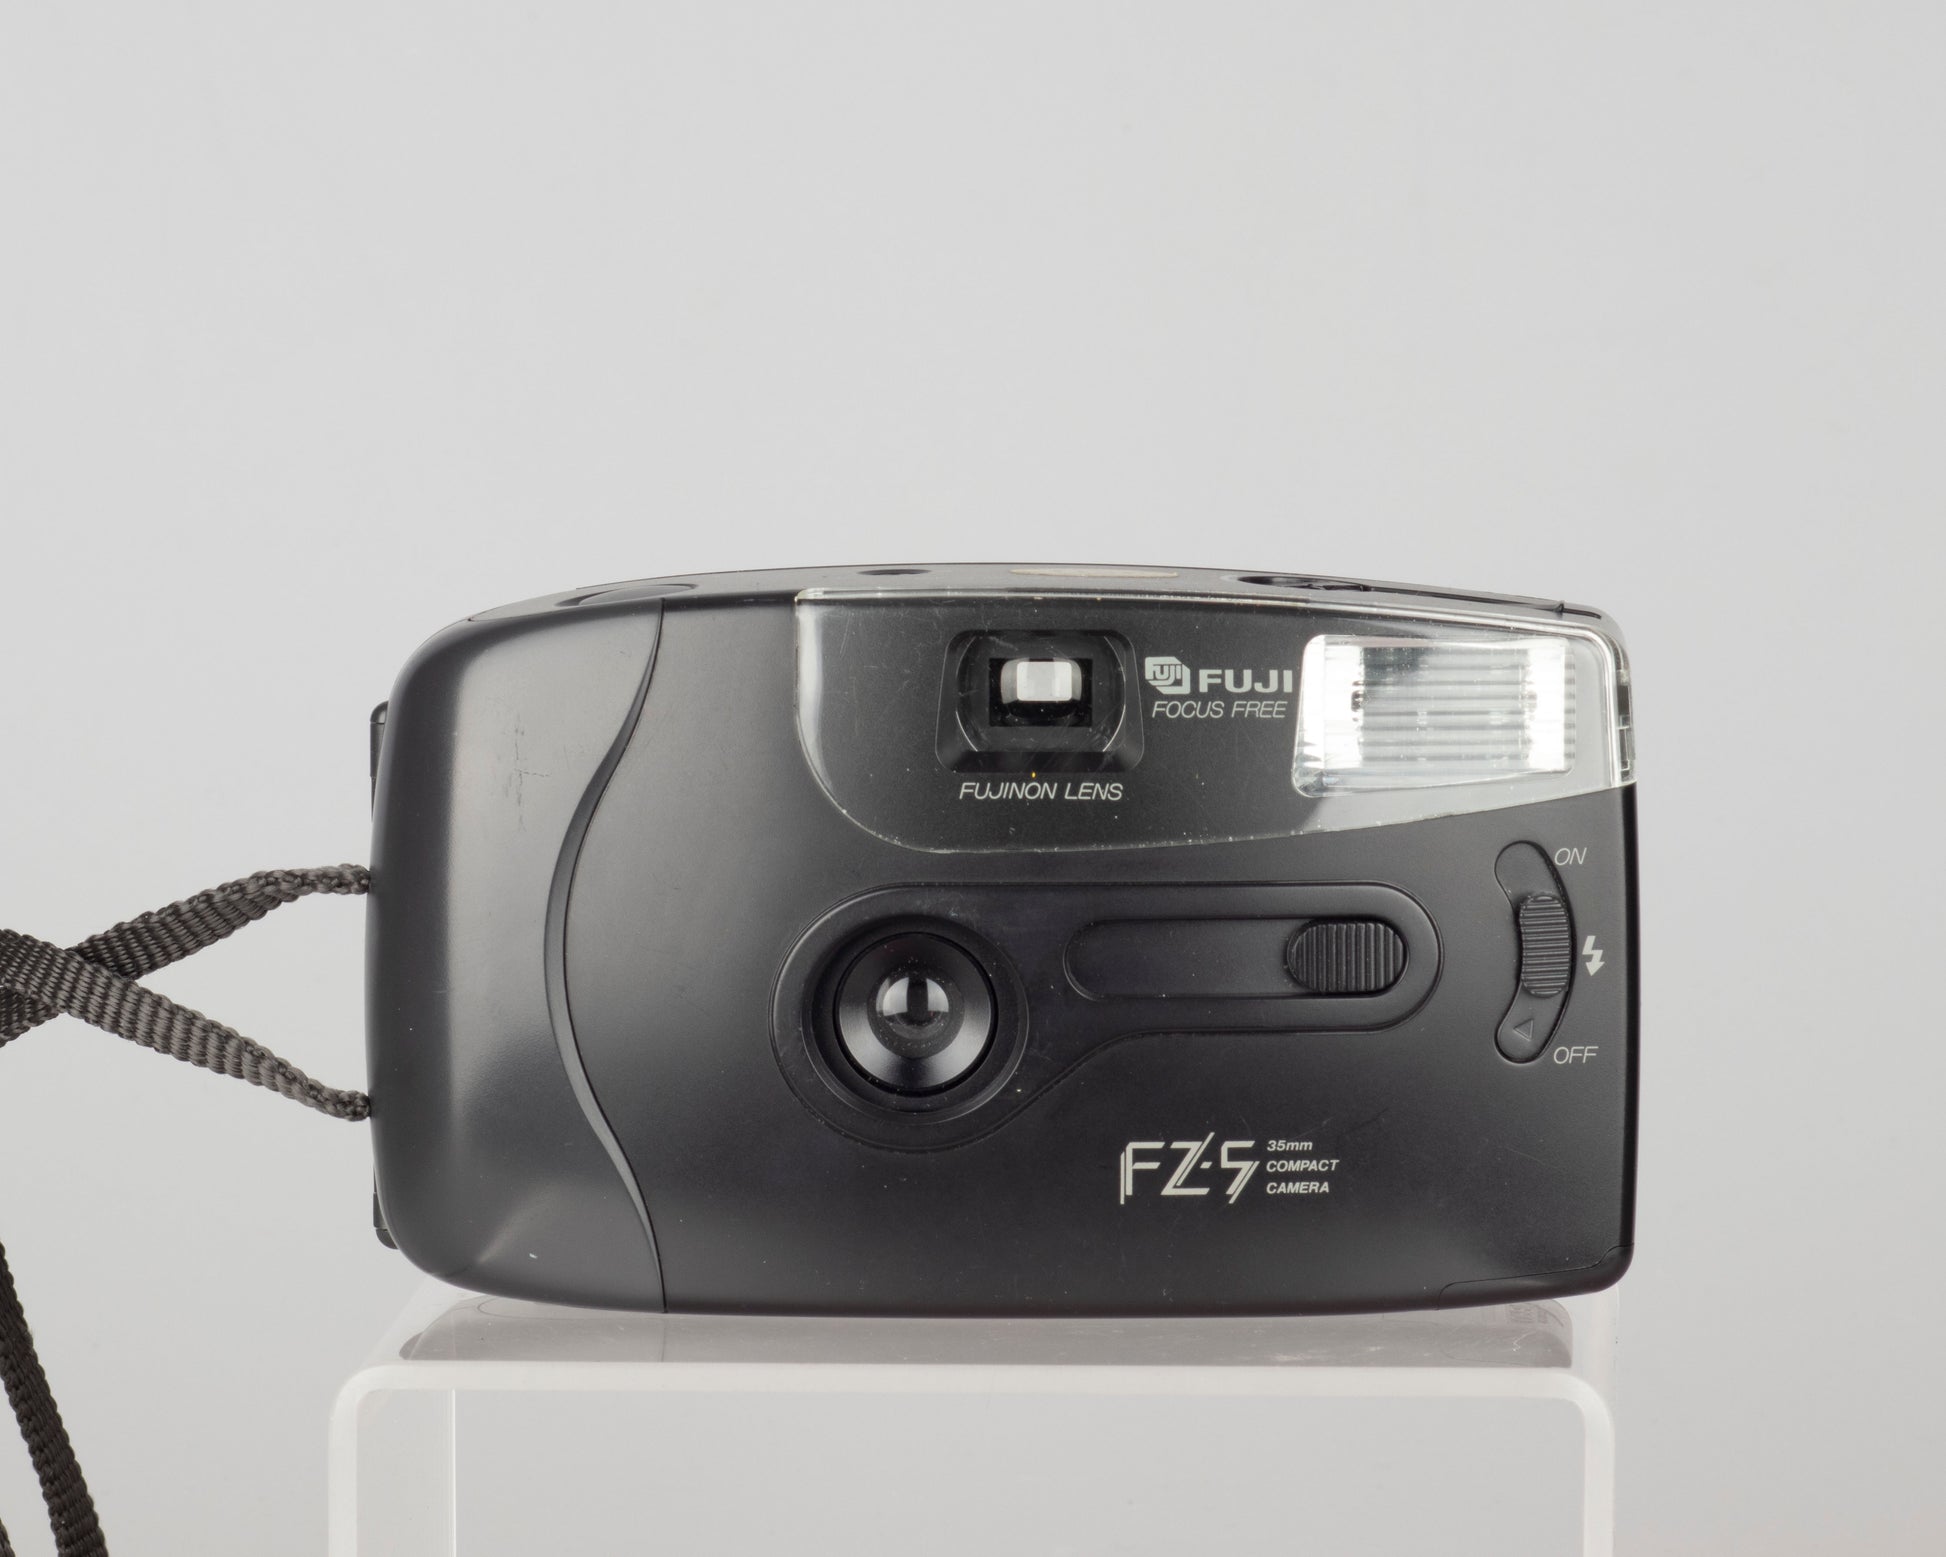 The Fujifilm FZ-5 is simple 35mm point-and-shoot from the 1990s